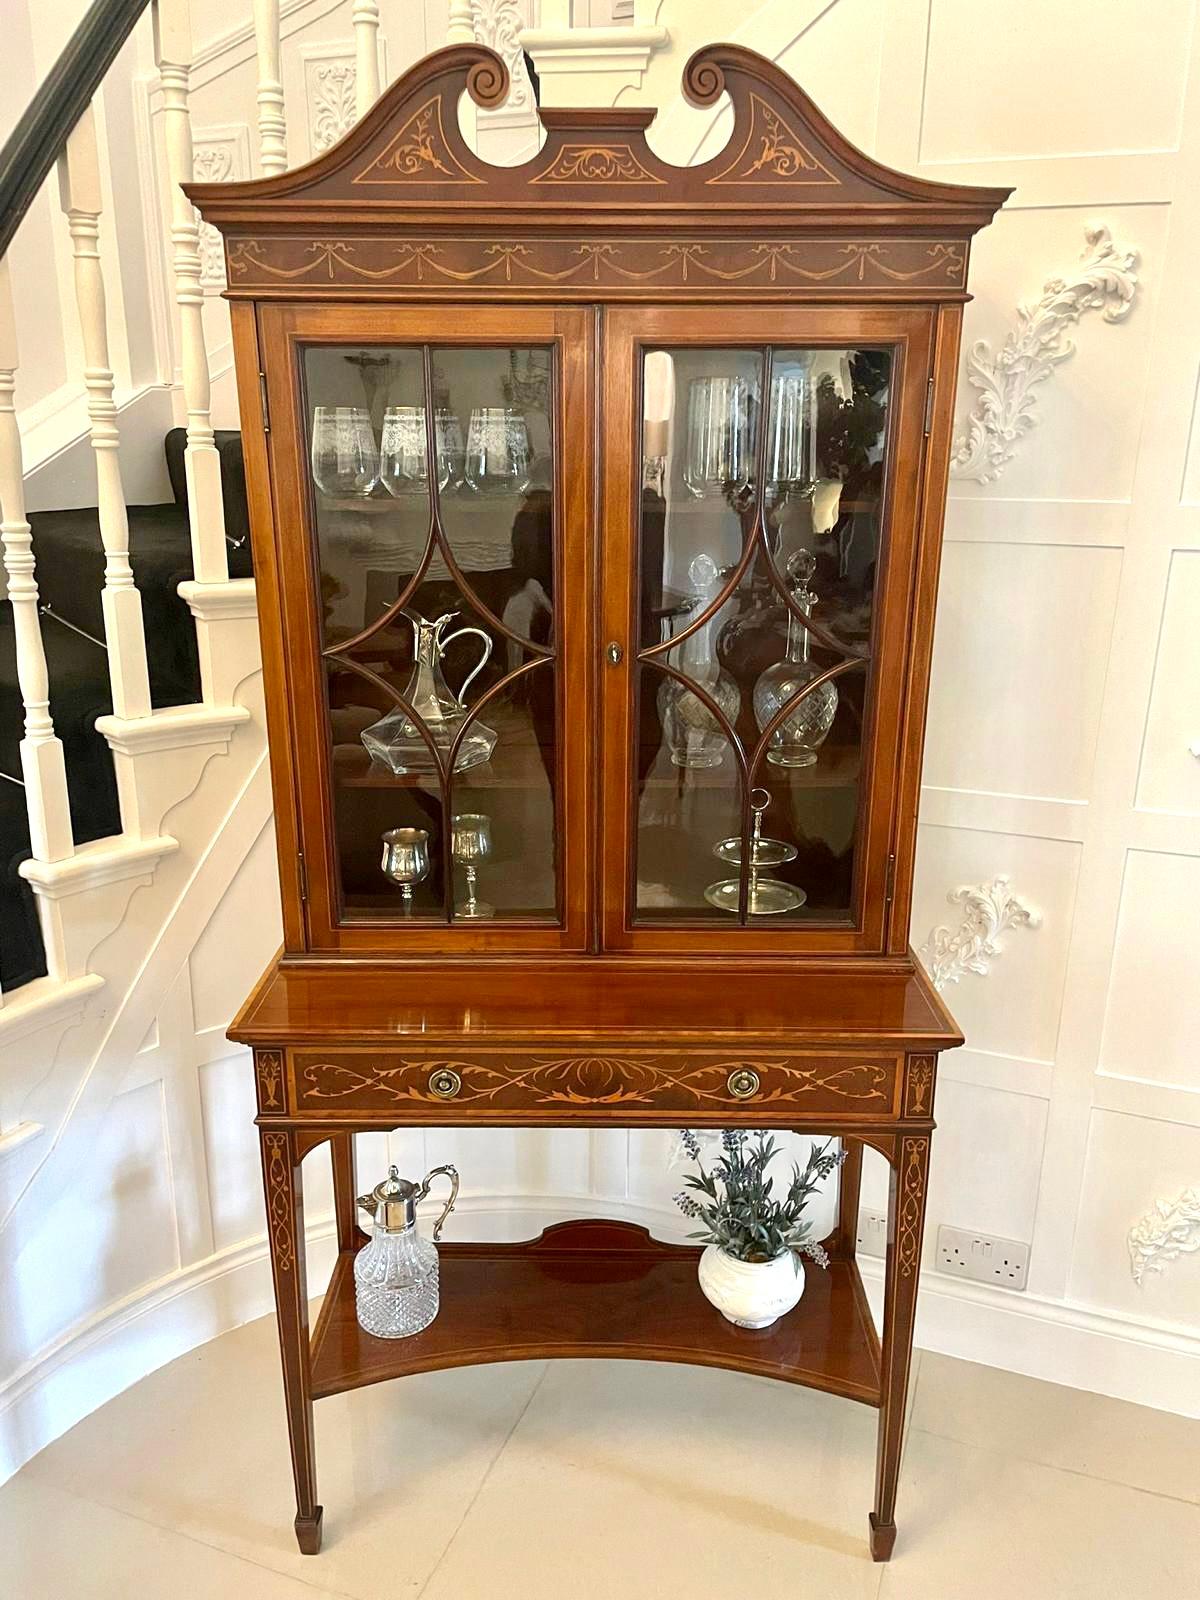 Fine quality antique Victorian mahogany inlaid display cabinet by Edwards and Roberts having a quality mahogany swan neck pediment with satinwood inlay above an inlaid frieze with swags and bows above a pair of astral glazed doors opening to reveal